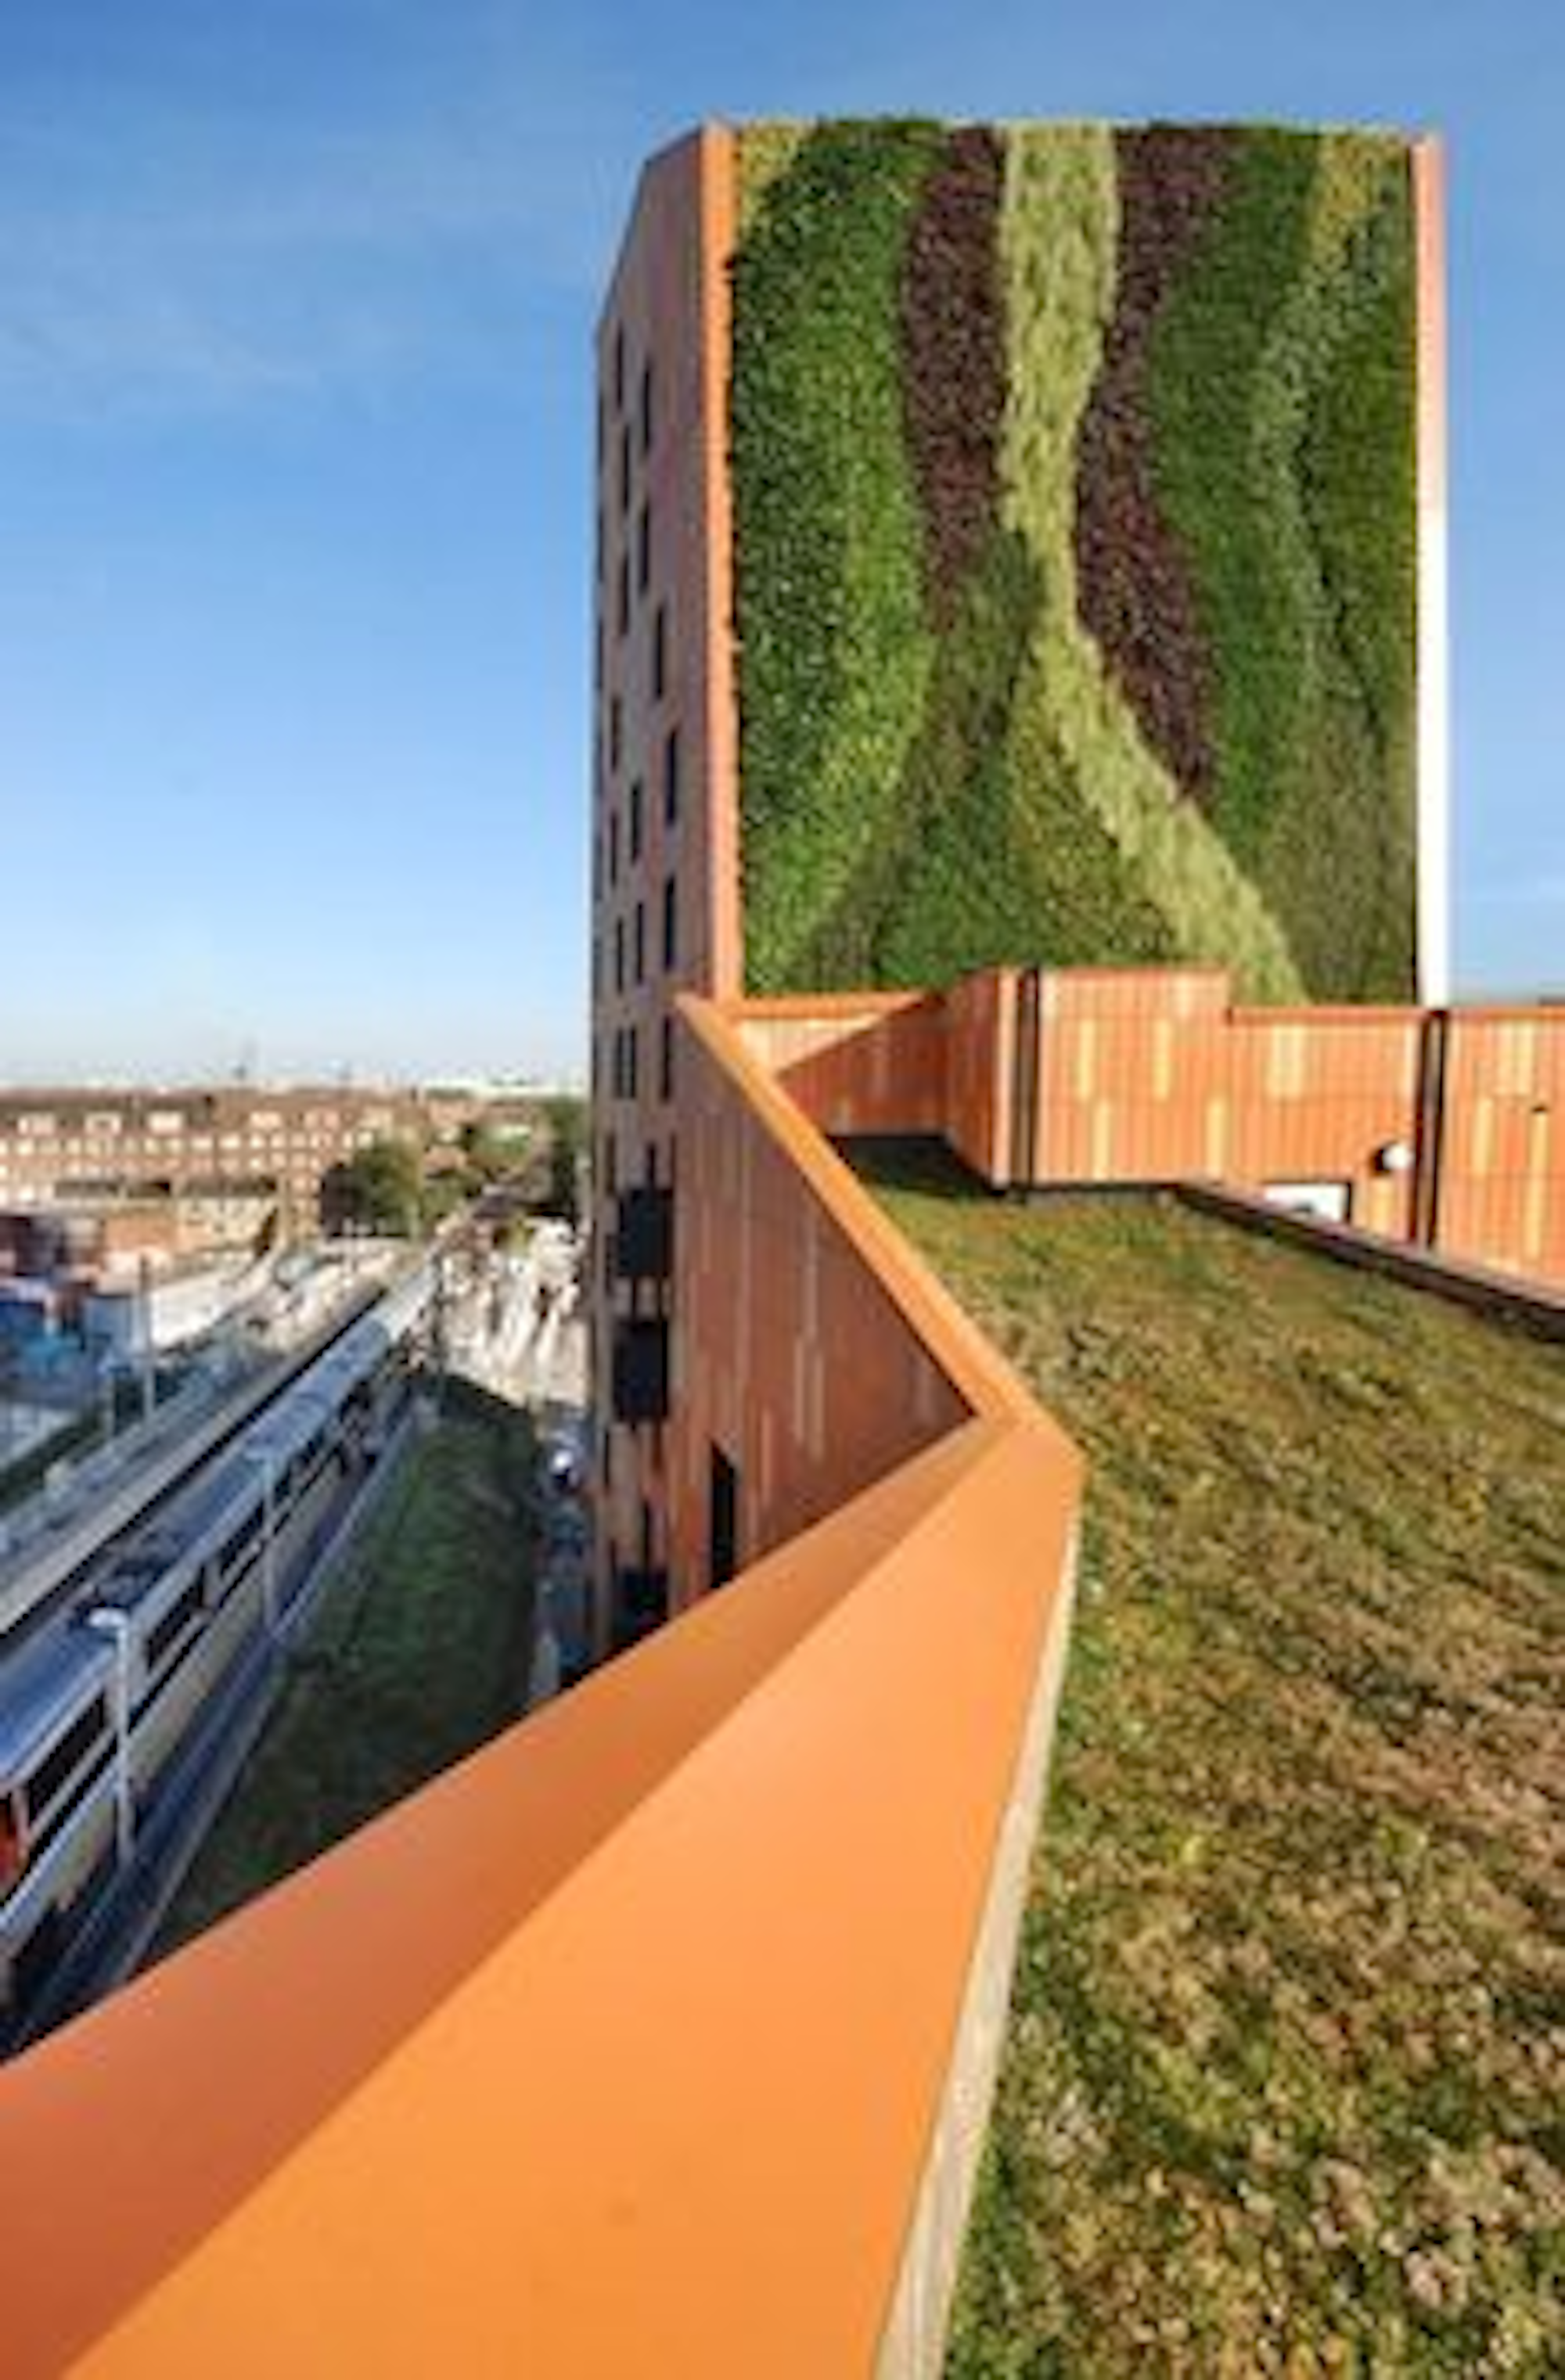 living wall and sedum green roof on apartment building and rooftop